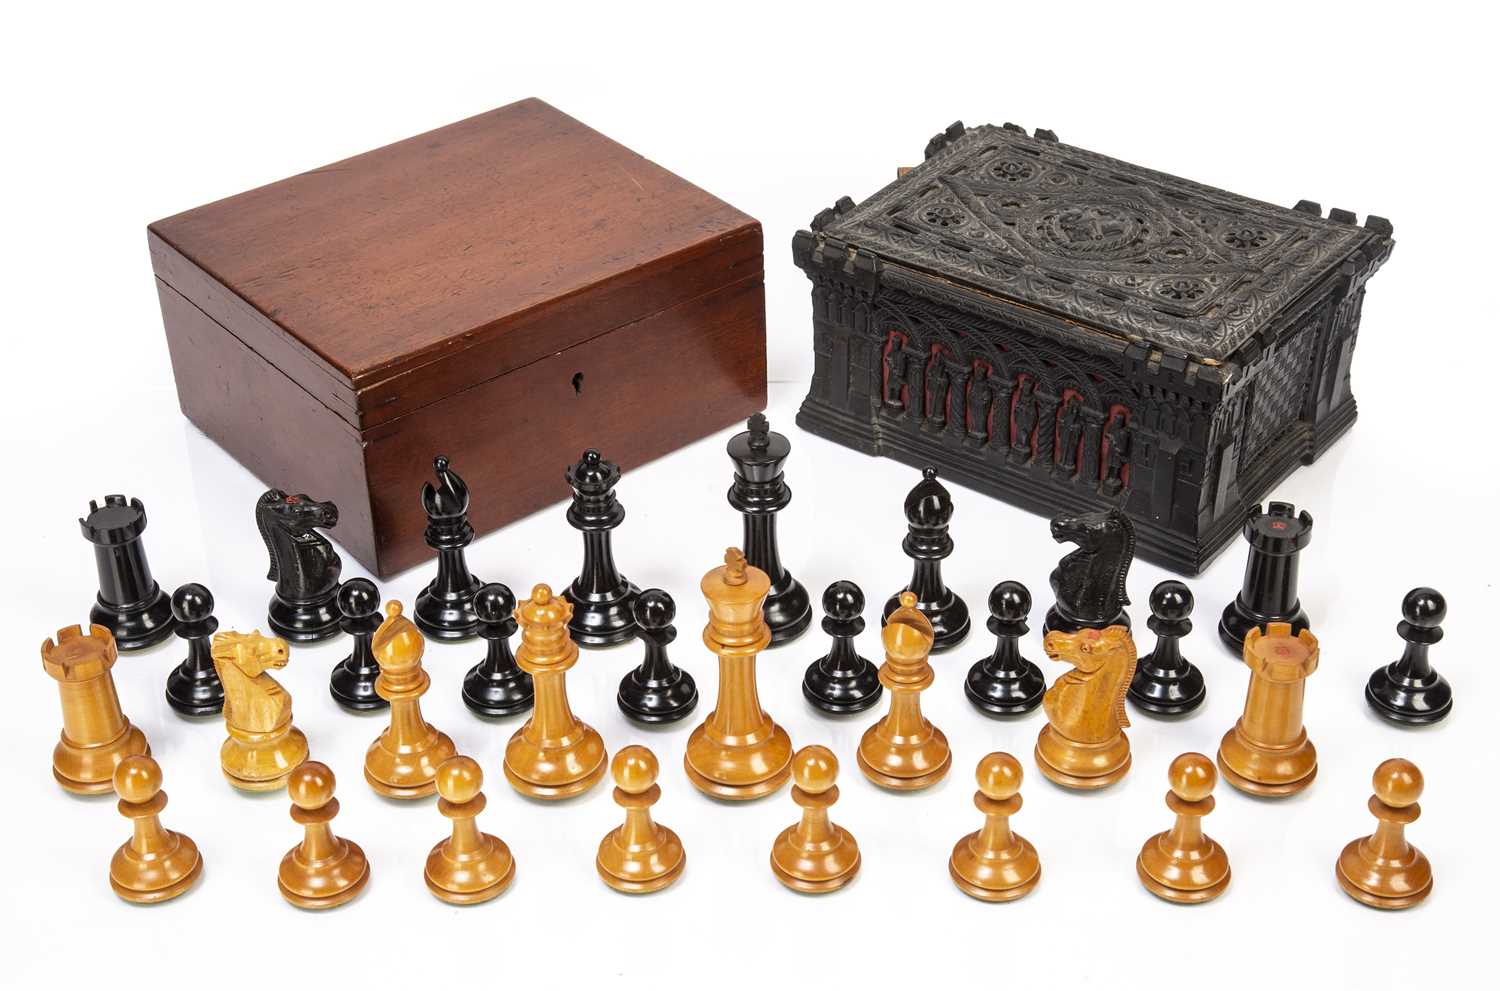 Staunton ebony and weighted boxwood chess set in a mahogany box, king 10cm high, box 21cm wide and a